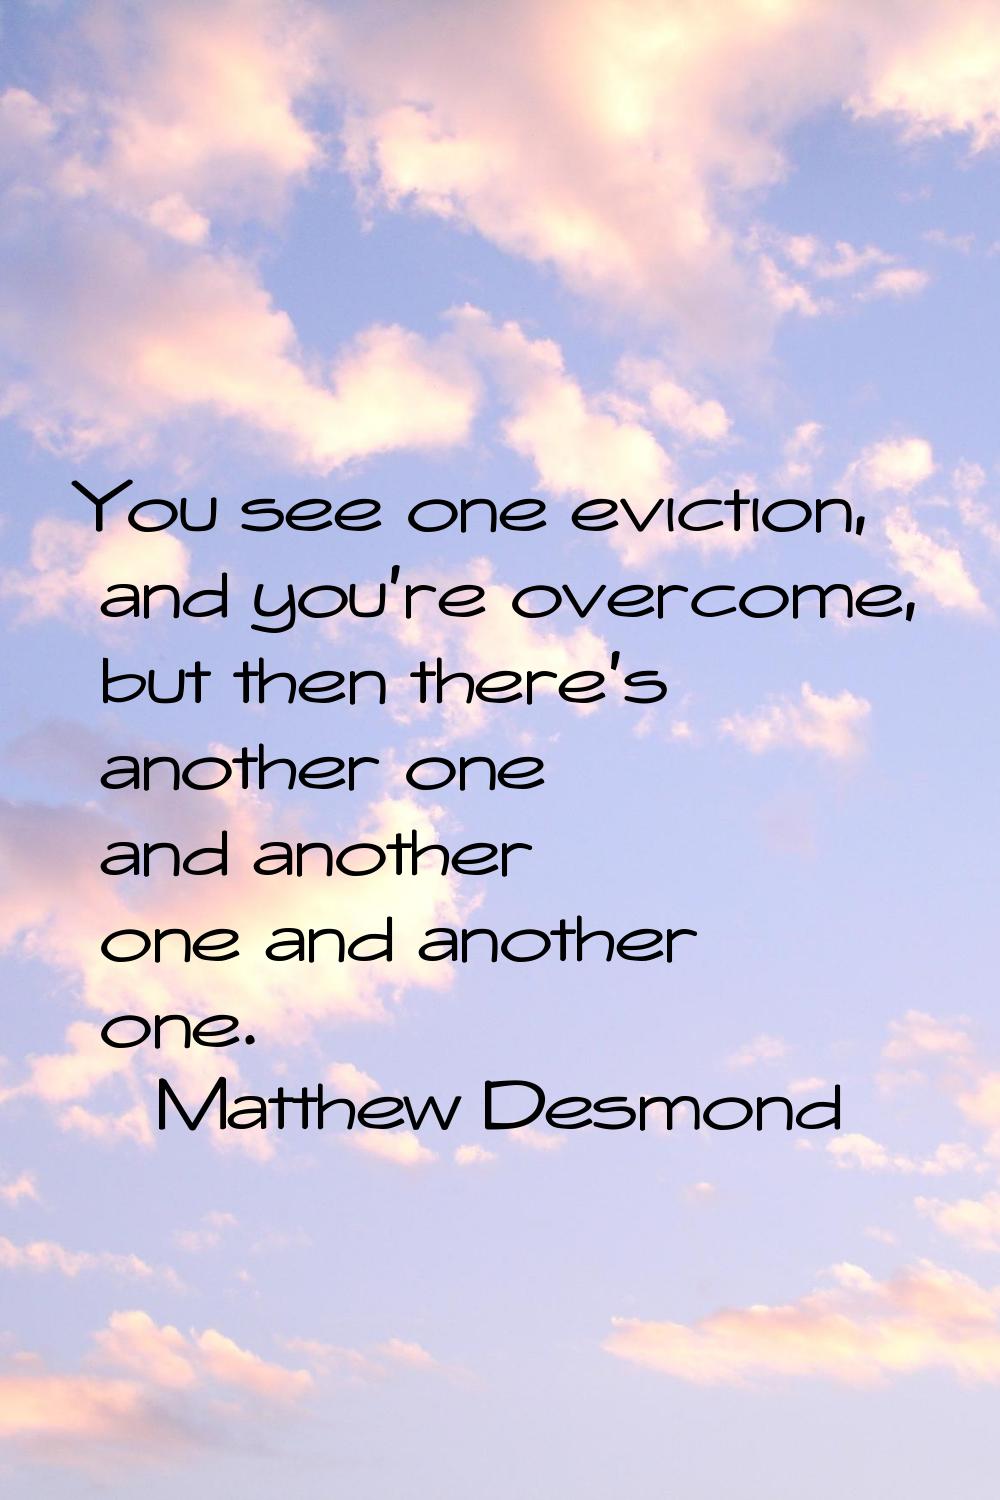 You see one eviction, and you're overcome, but then there's another one and another one and another